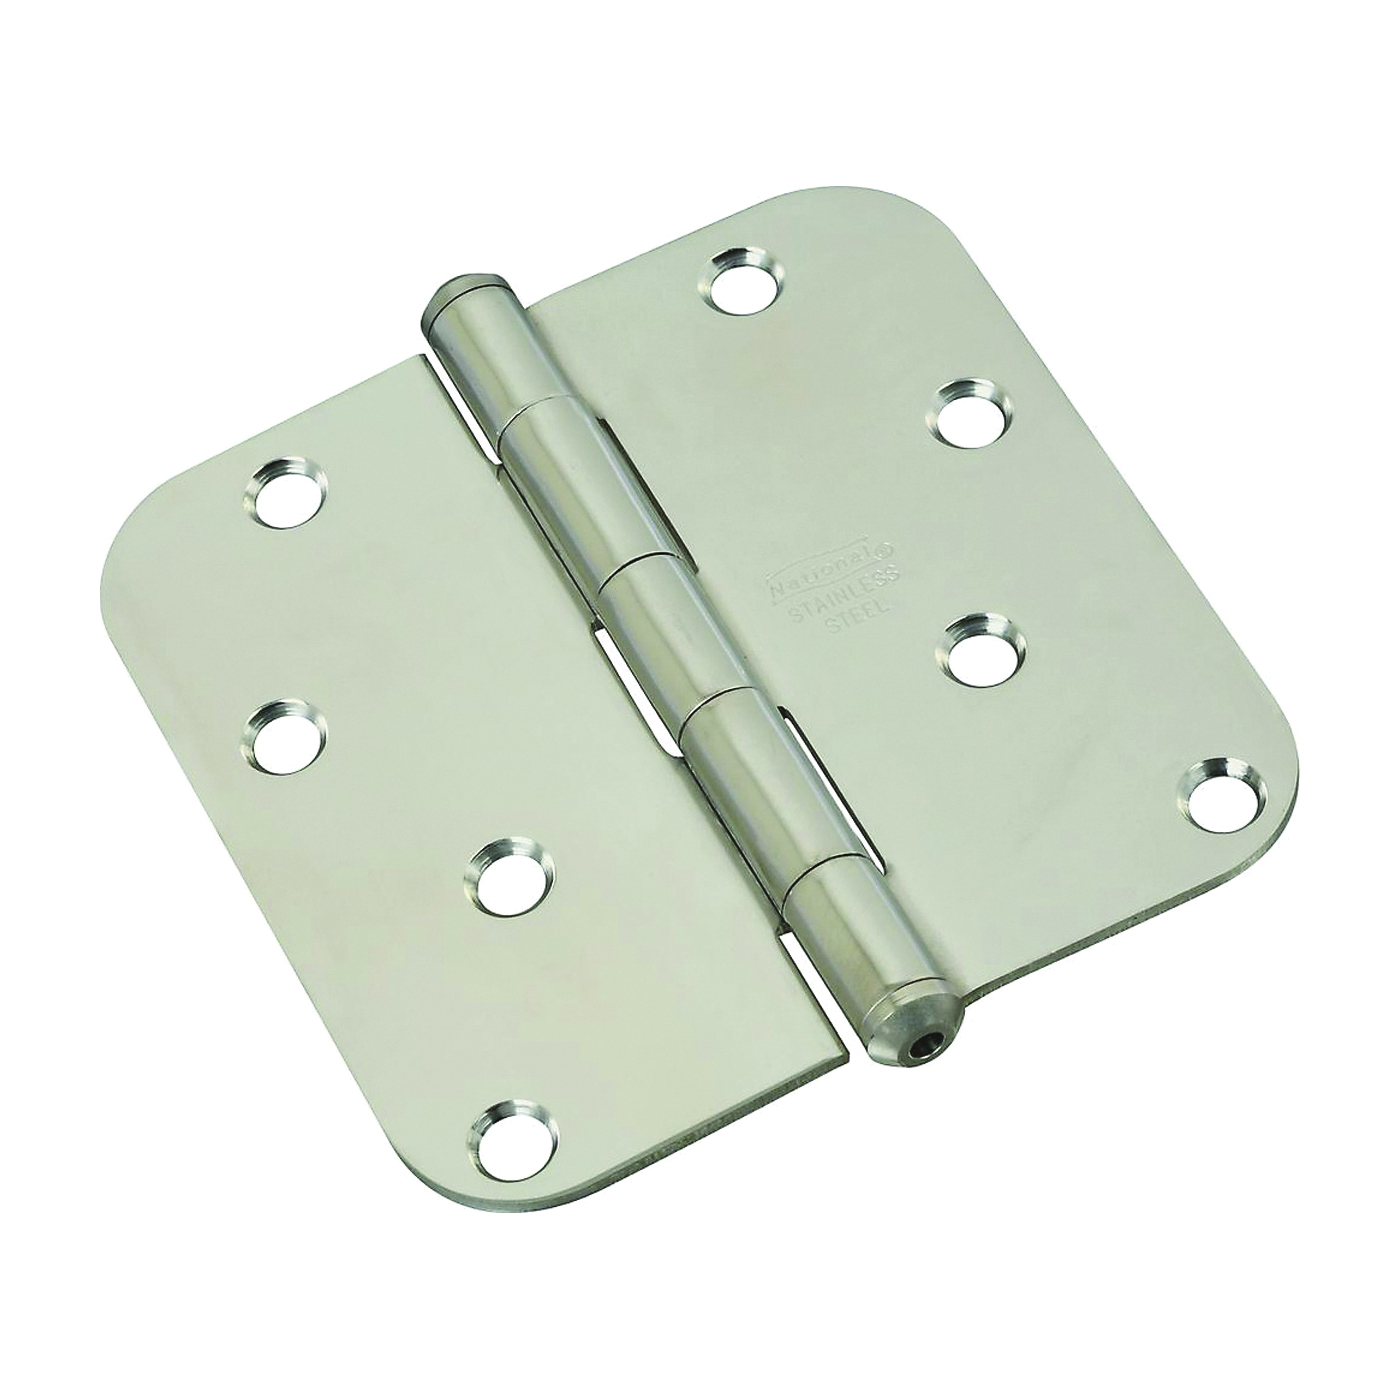 N830-270 Door Hinge, Stainless Steel, Zinc, Non-Rising, Removable Pin, Full-Mortise Mounting, 55 lb